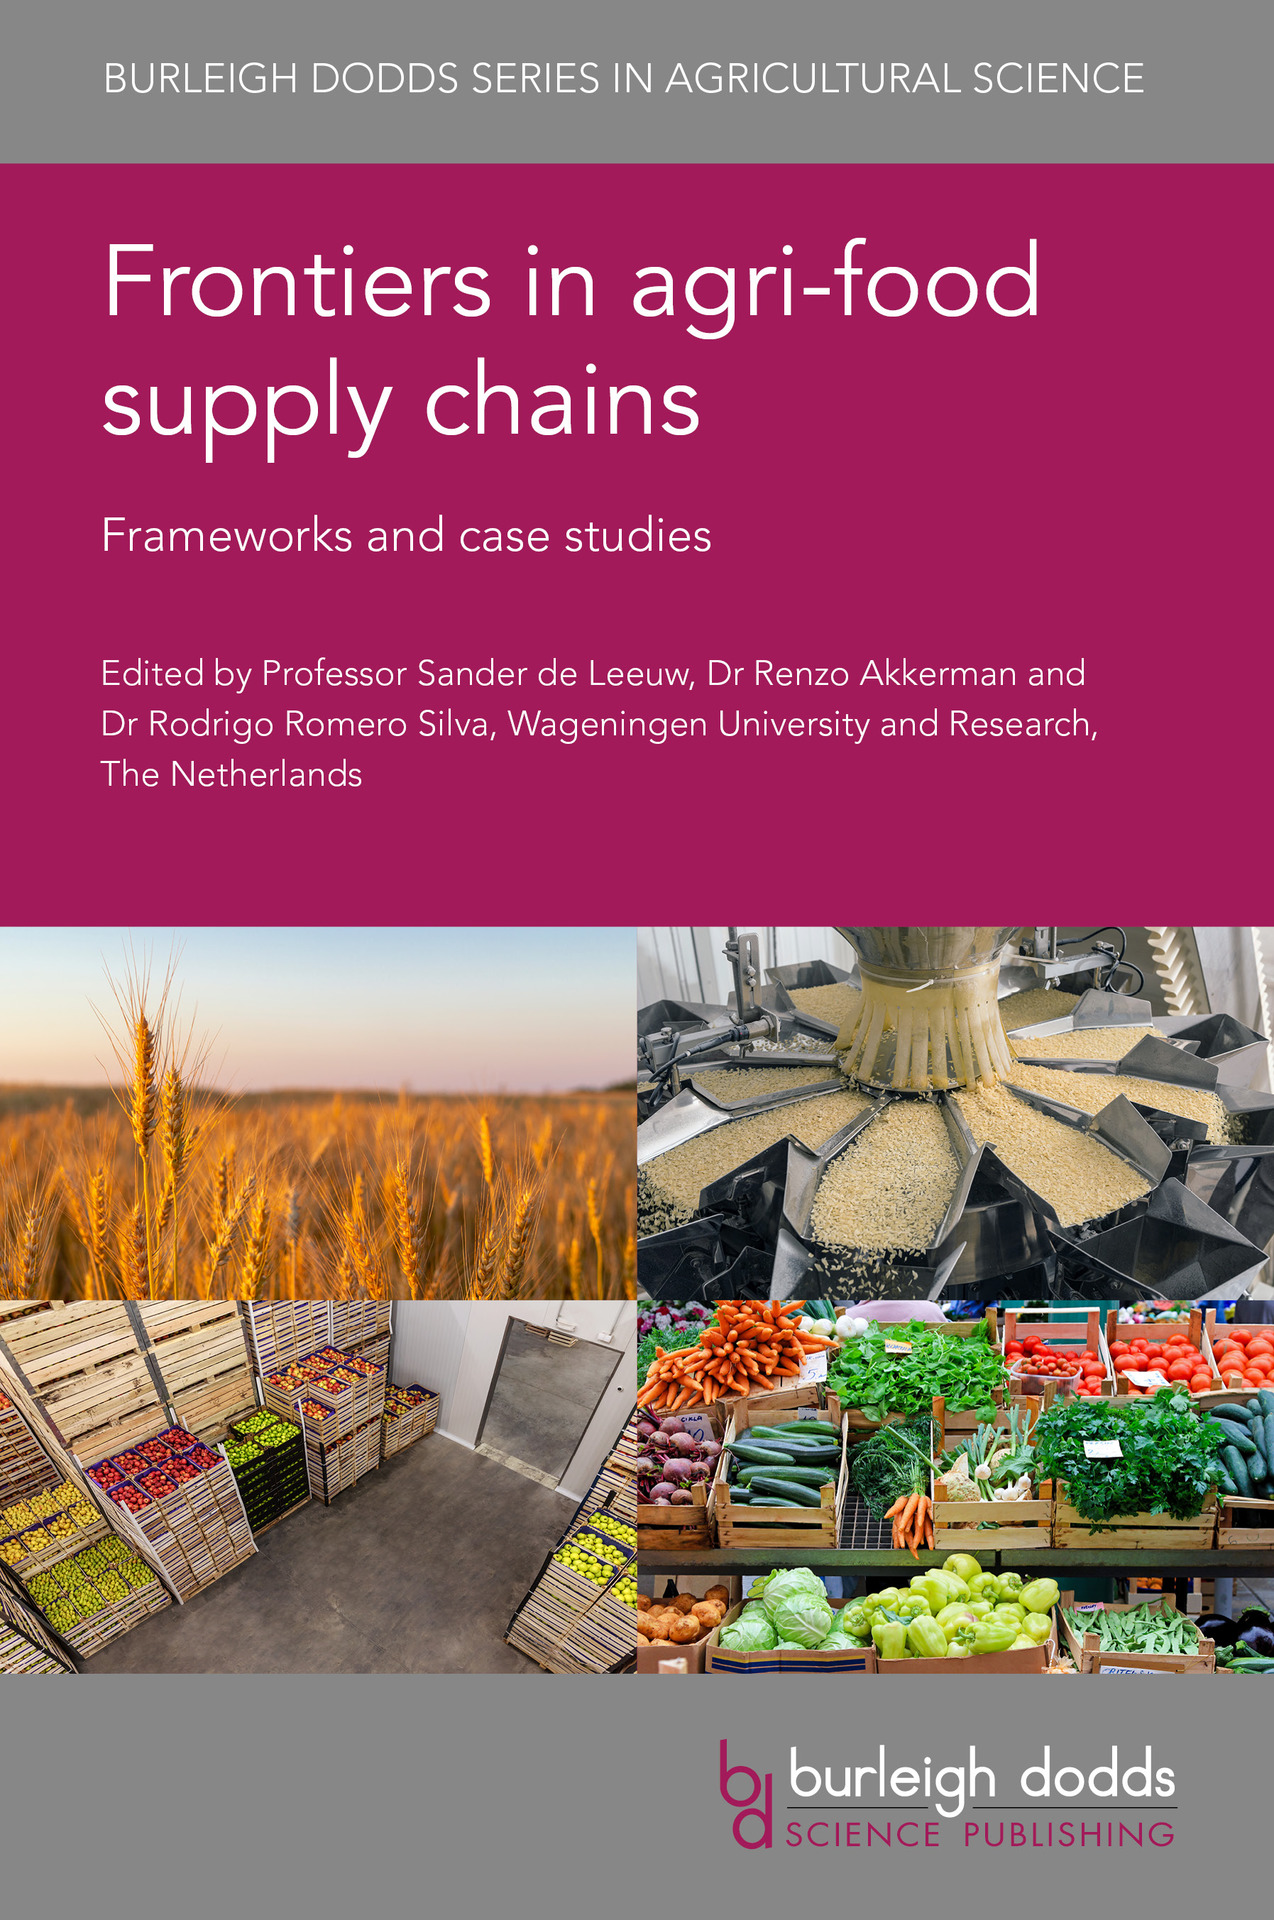 Frontiers in agri-food supply chains